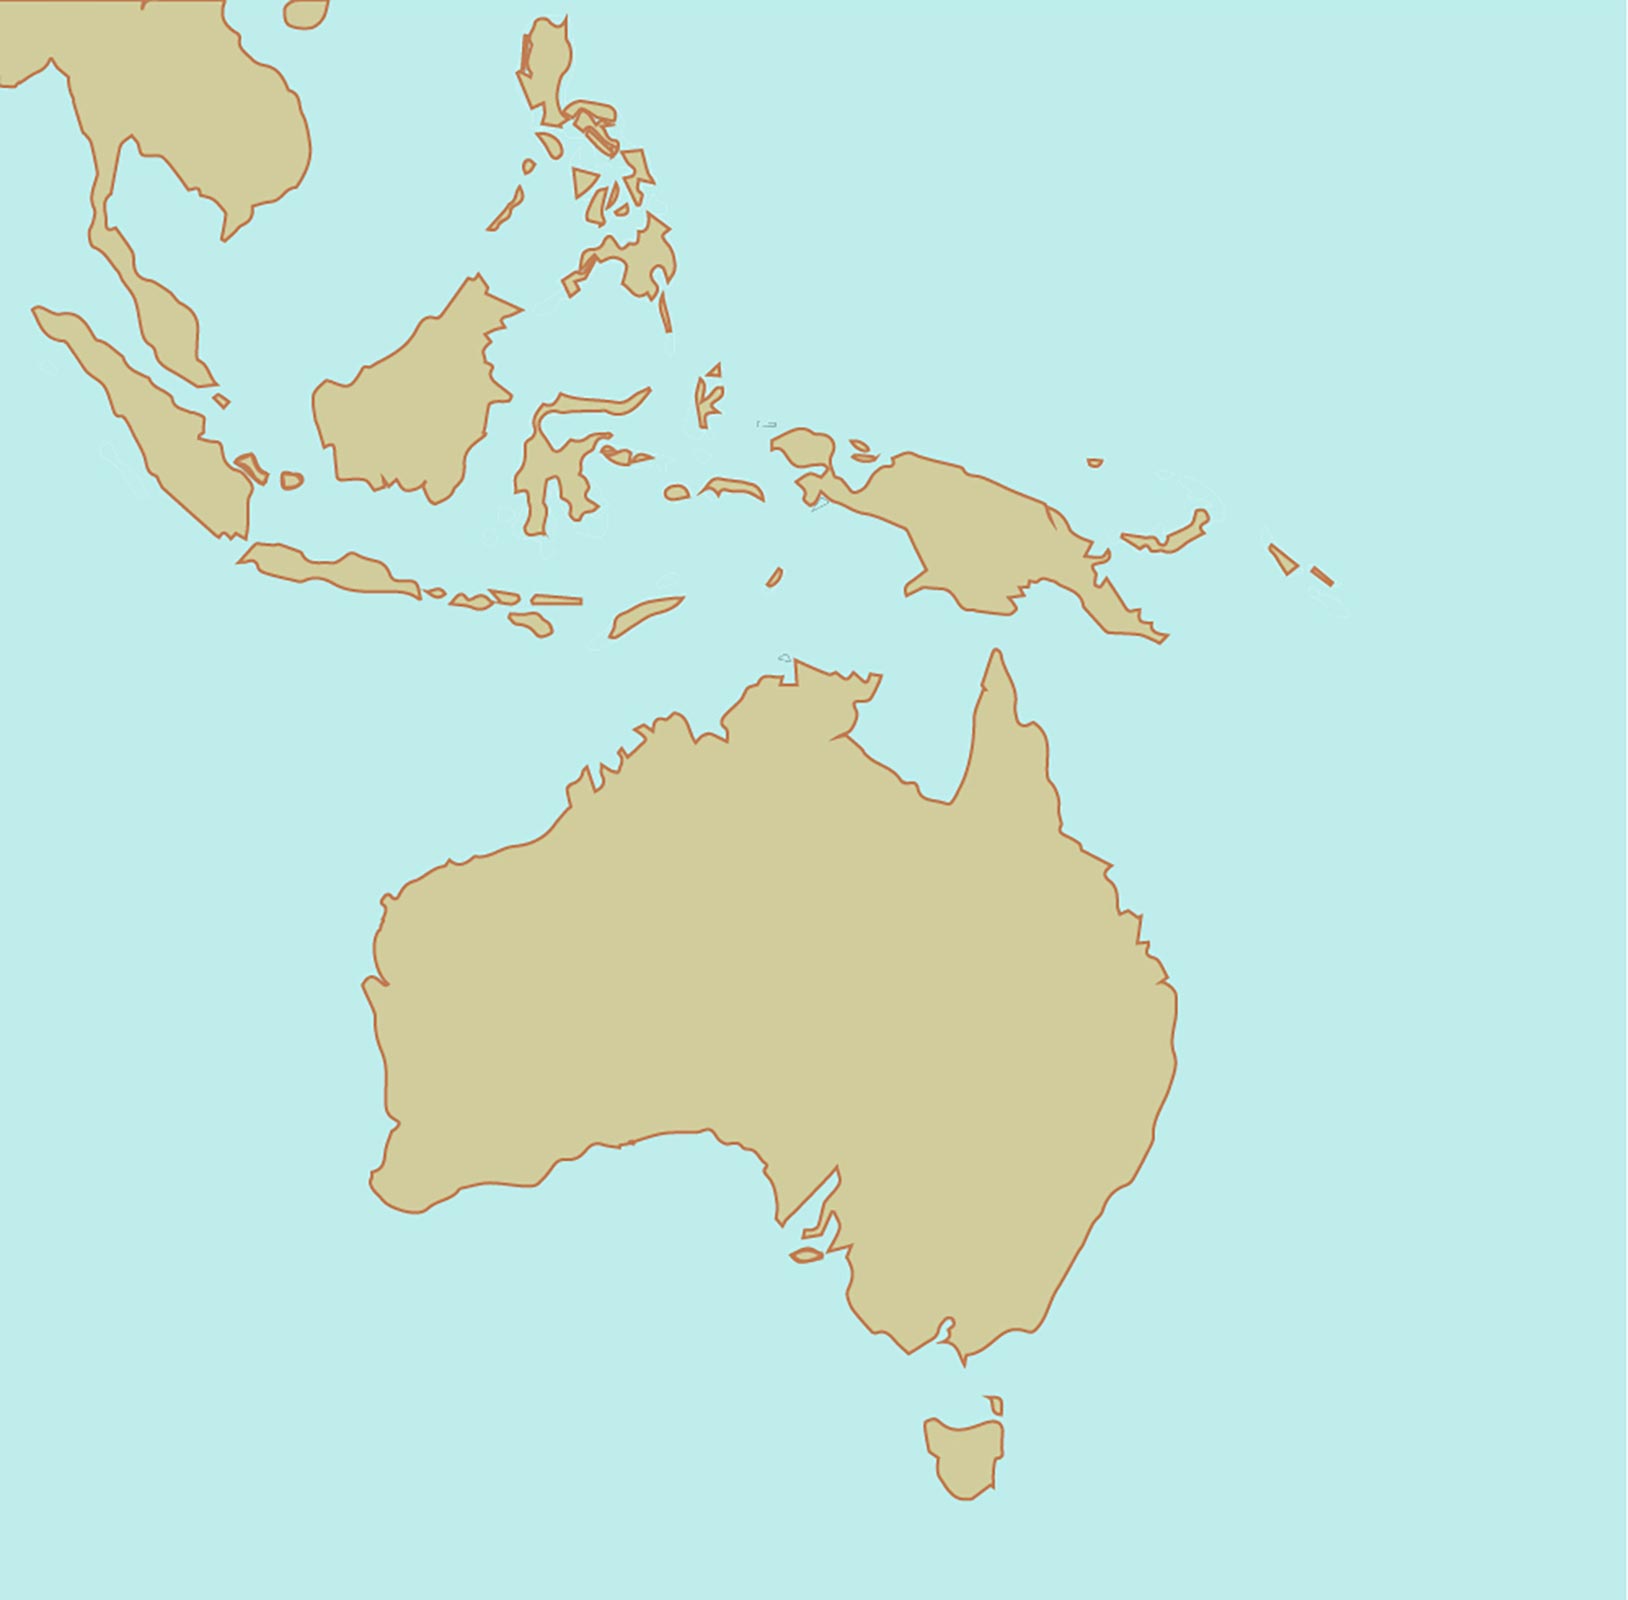 Map A: Australia and South East Asia today